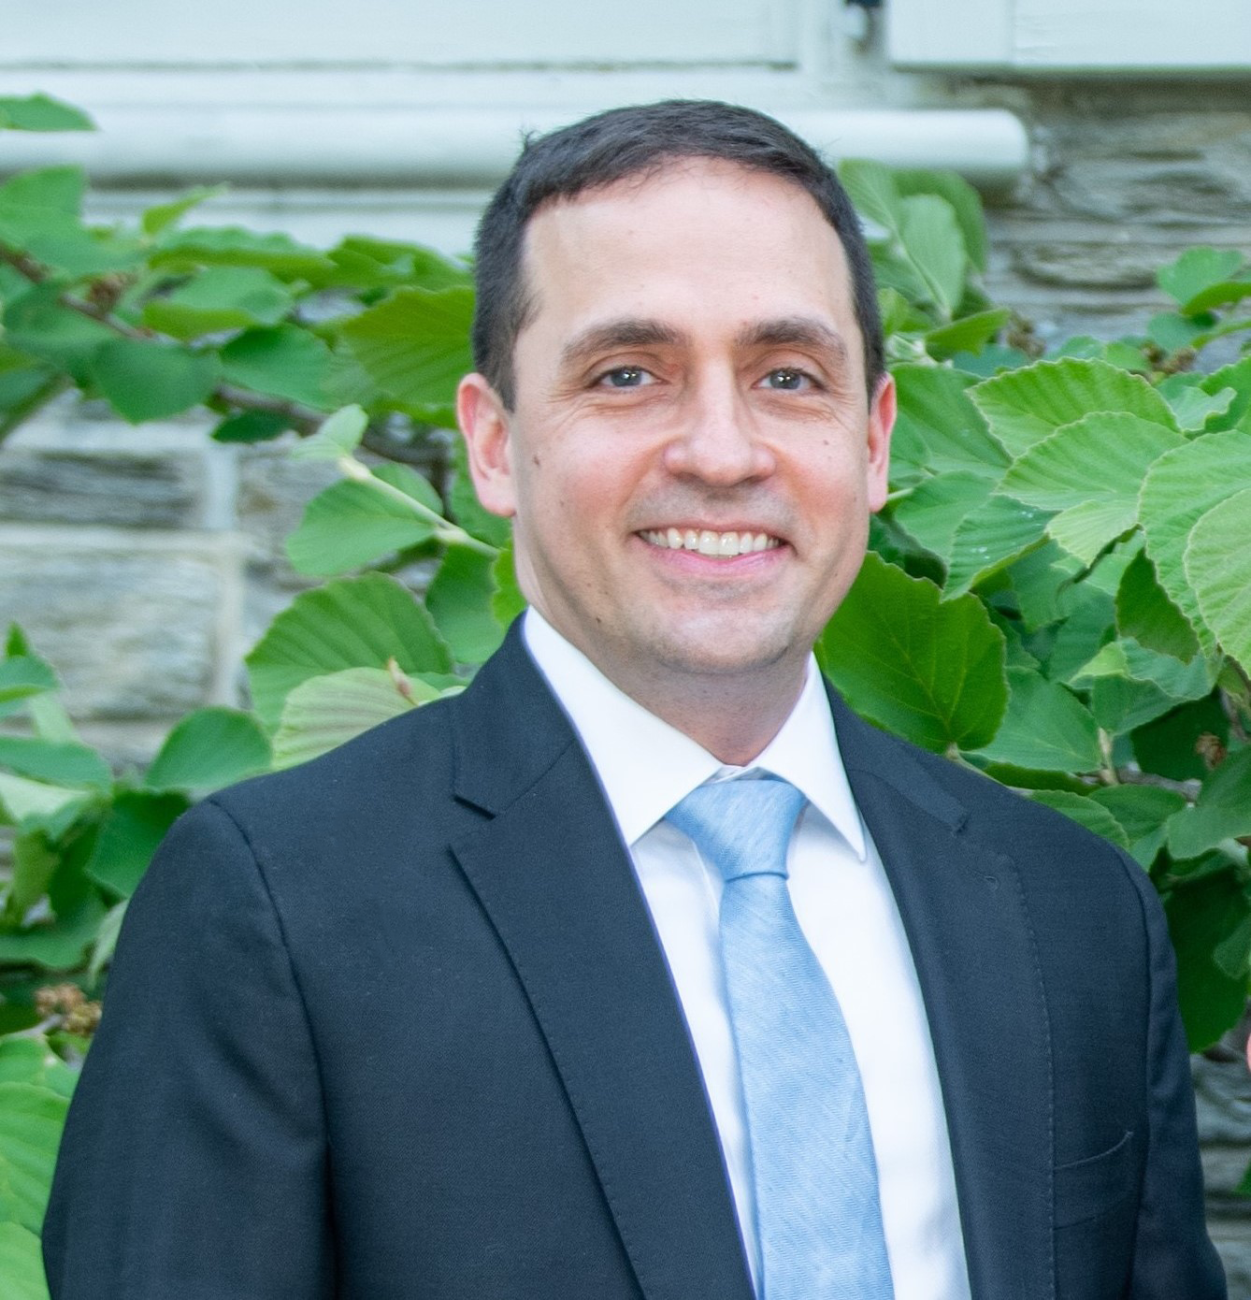 Headshot of Adav Noti, CLC's new executive director. He's wearing a suit in front of some greenery.